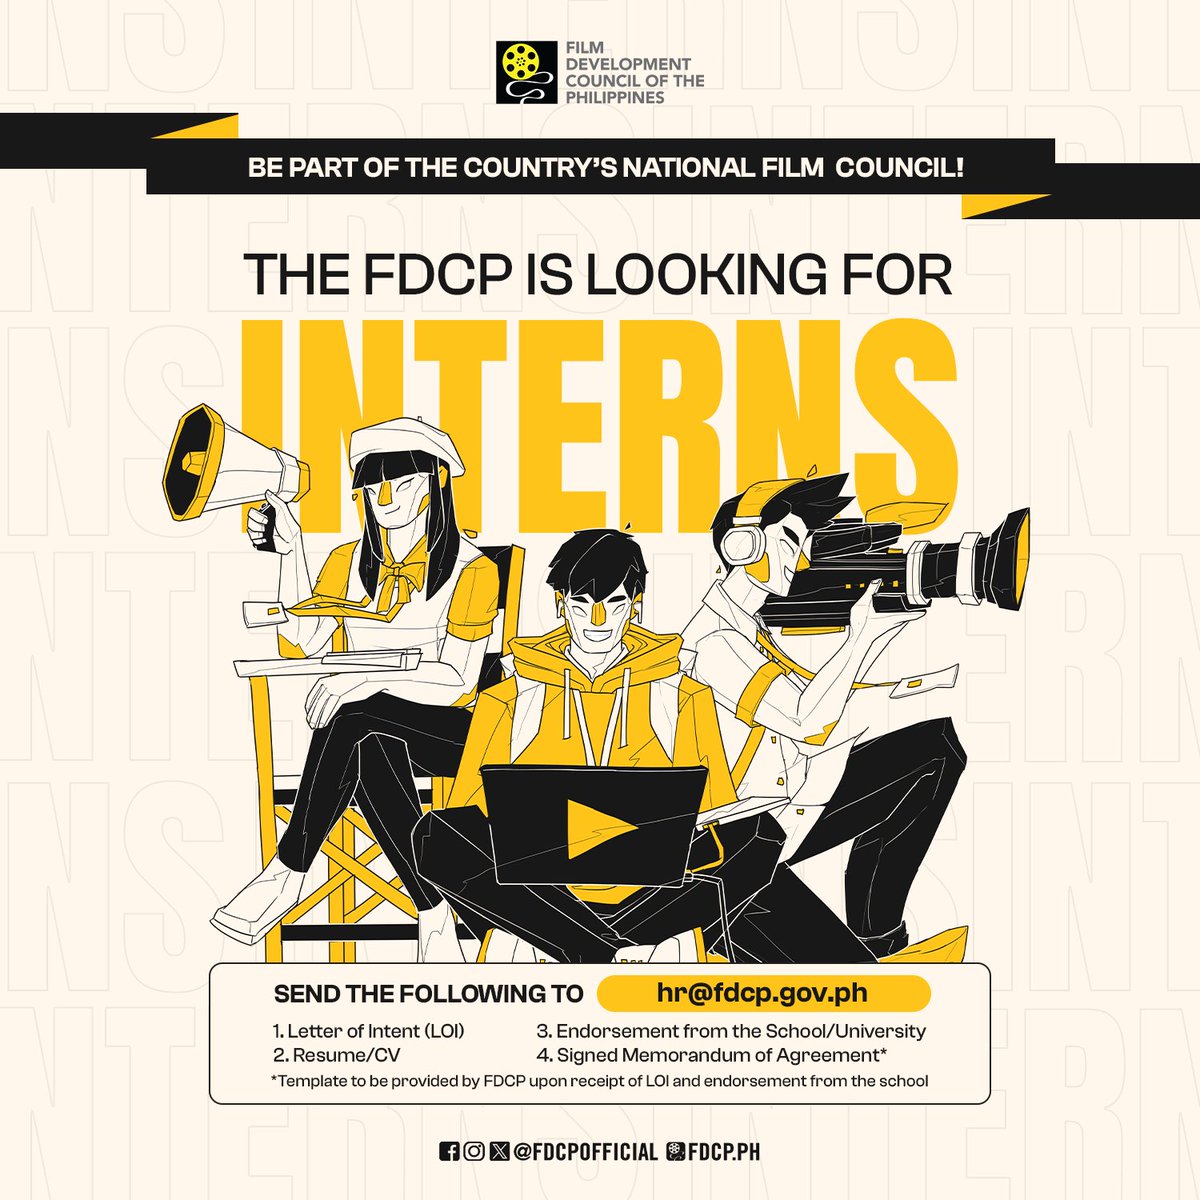 If you are interested in gaining hands-on experience in the Philippine film industry, apply now for an internship at the Film Development Council of the Philippines (FDCP)! 📣

Join the national film agency in championing the growth of Philippine cinema! #FDCP